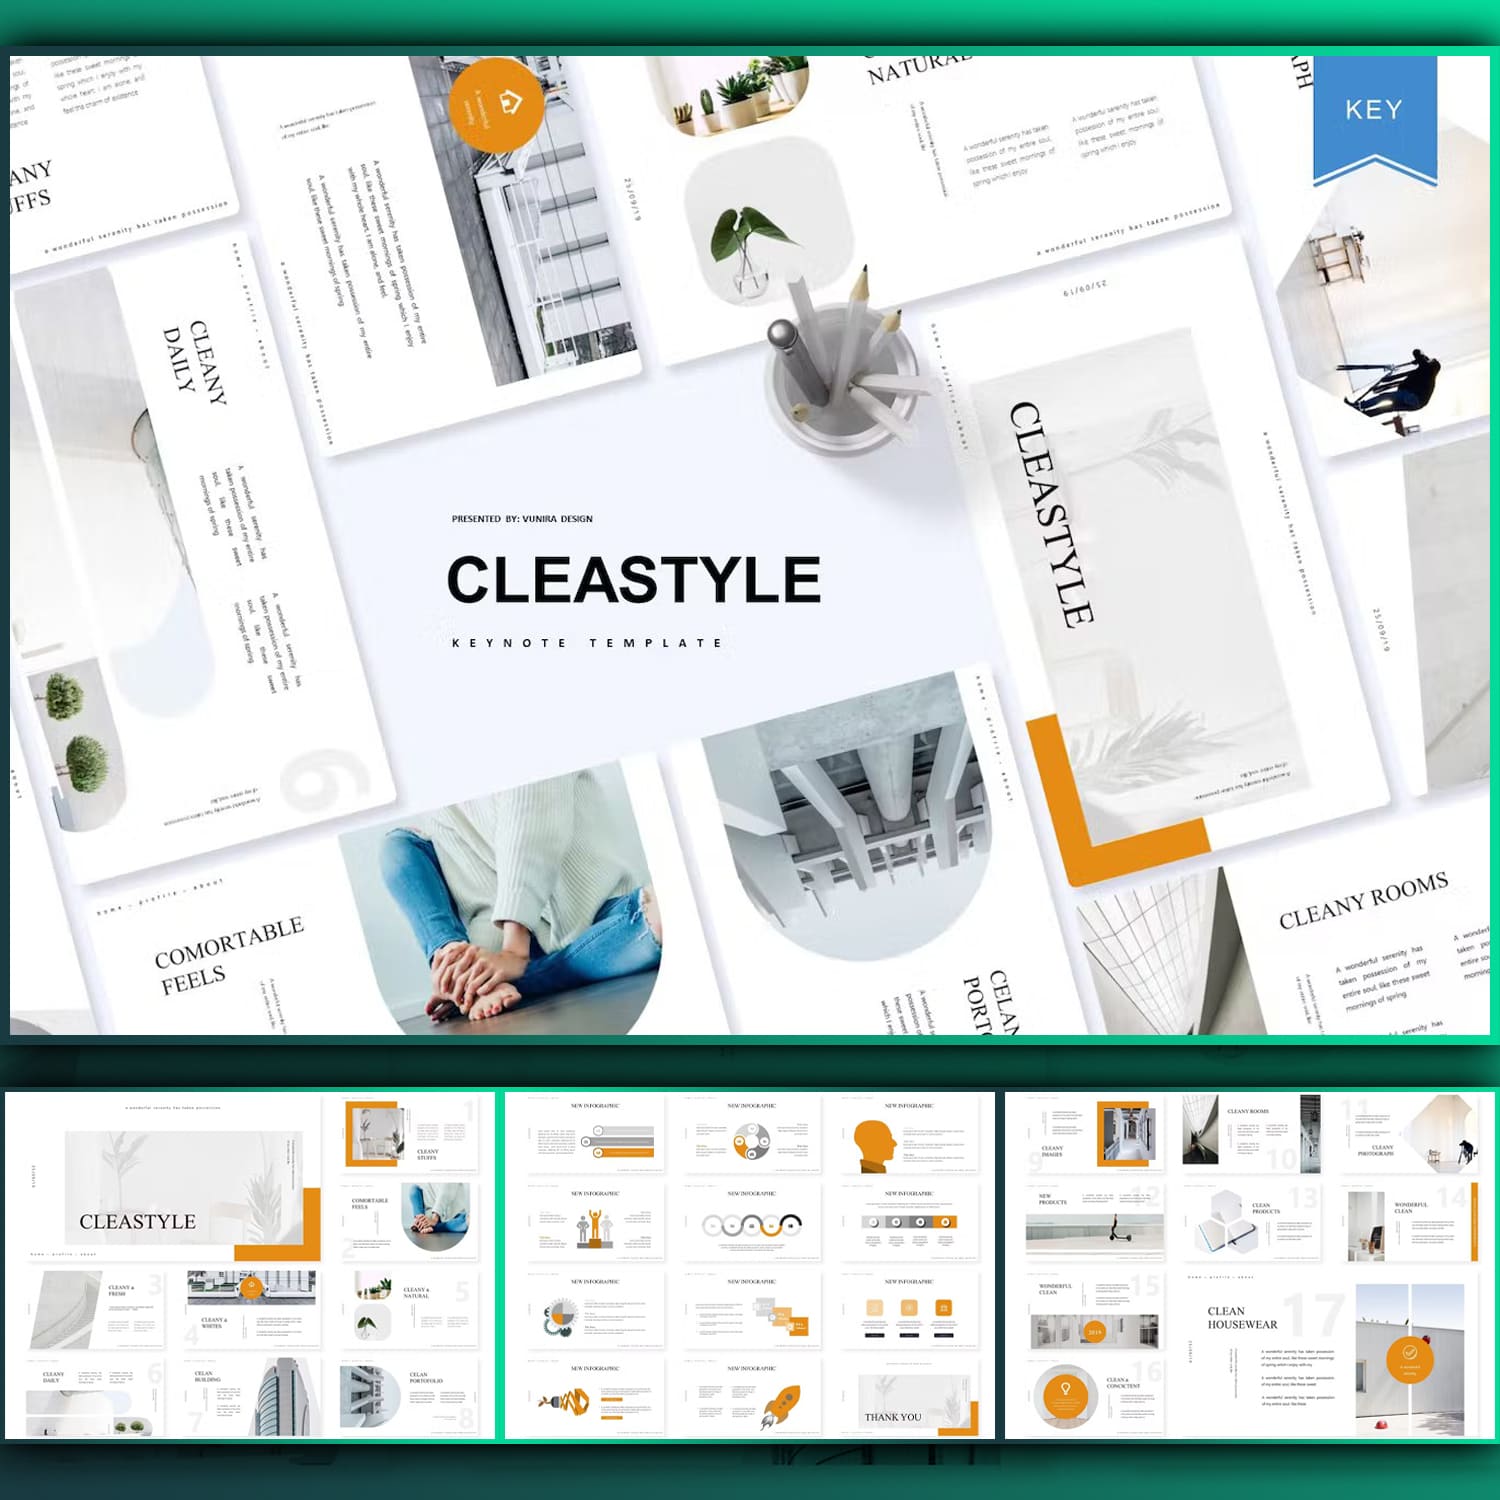 Сleastyle keynote template, main picture 1500x1500.